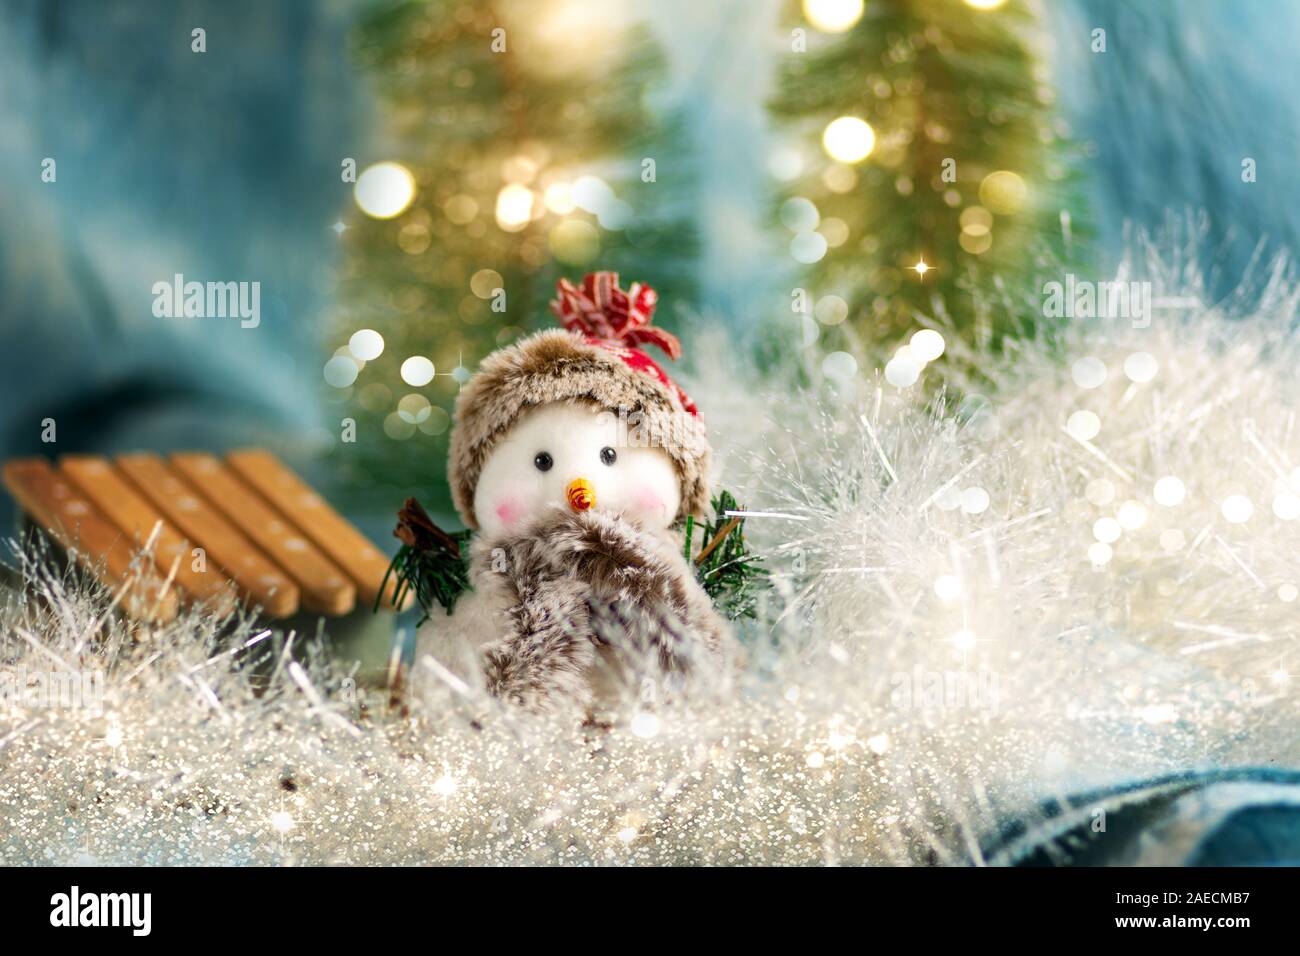 Toy snowman with festive Christmas holiday background Stock Photo